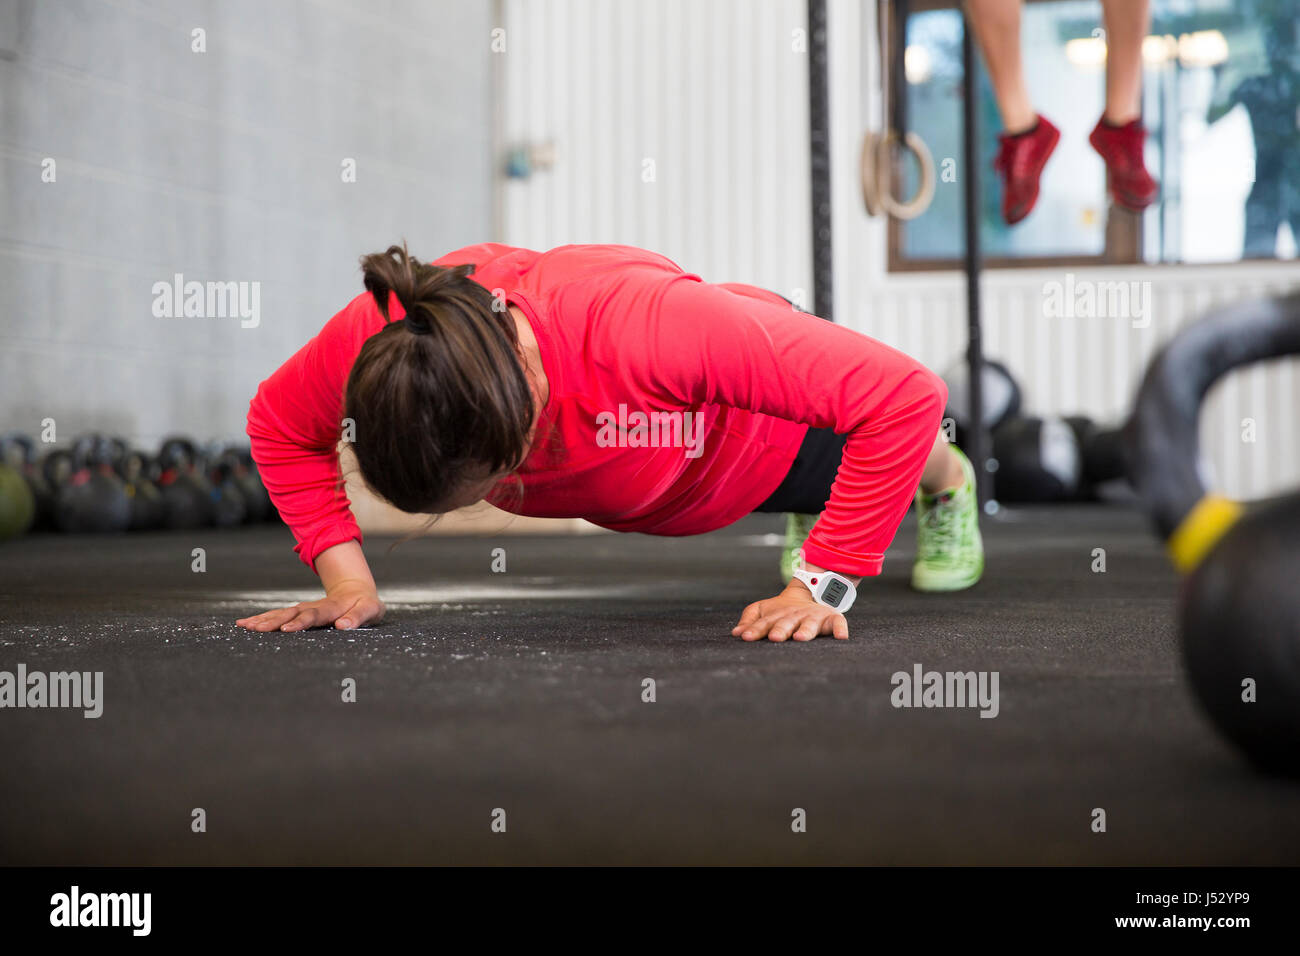 Fit Female Athlete Doing Pushups In Health Club Stock Photo